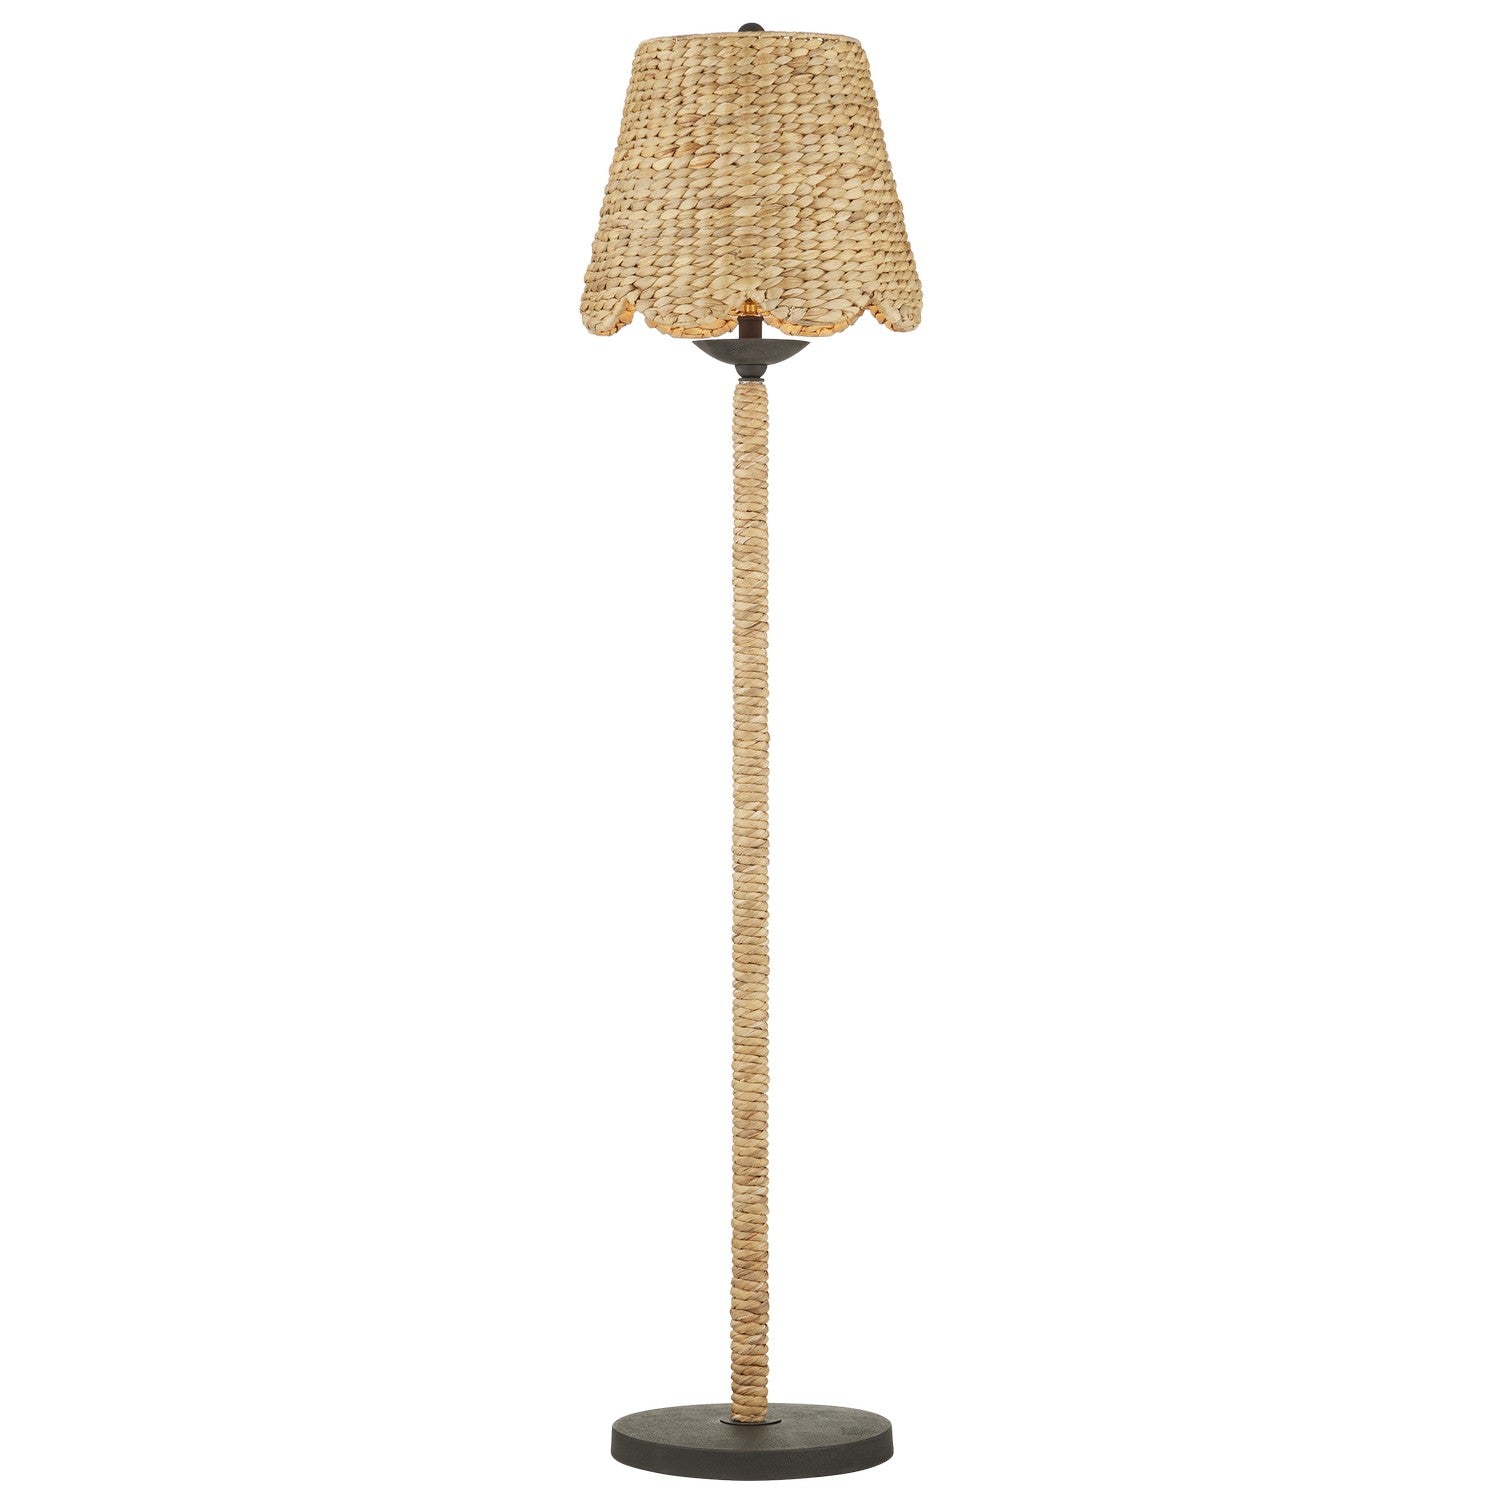 Currey and Company - 8000-0139 - One Light Floor Lamp - Suzanne Duin - Natural/Mole Black